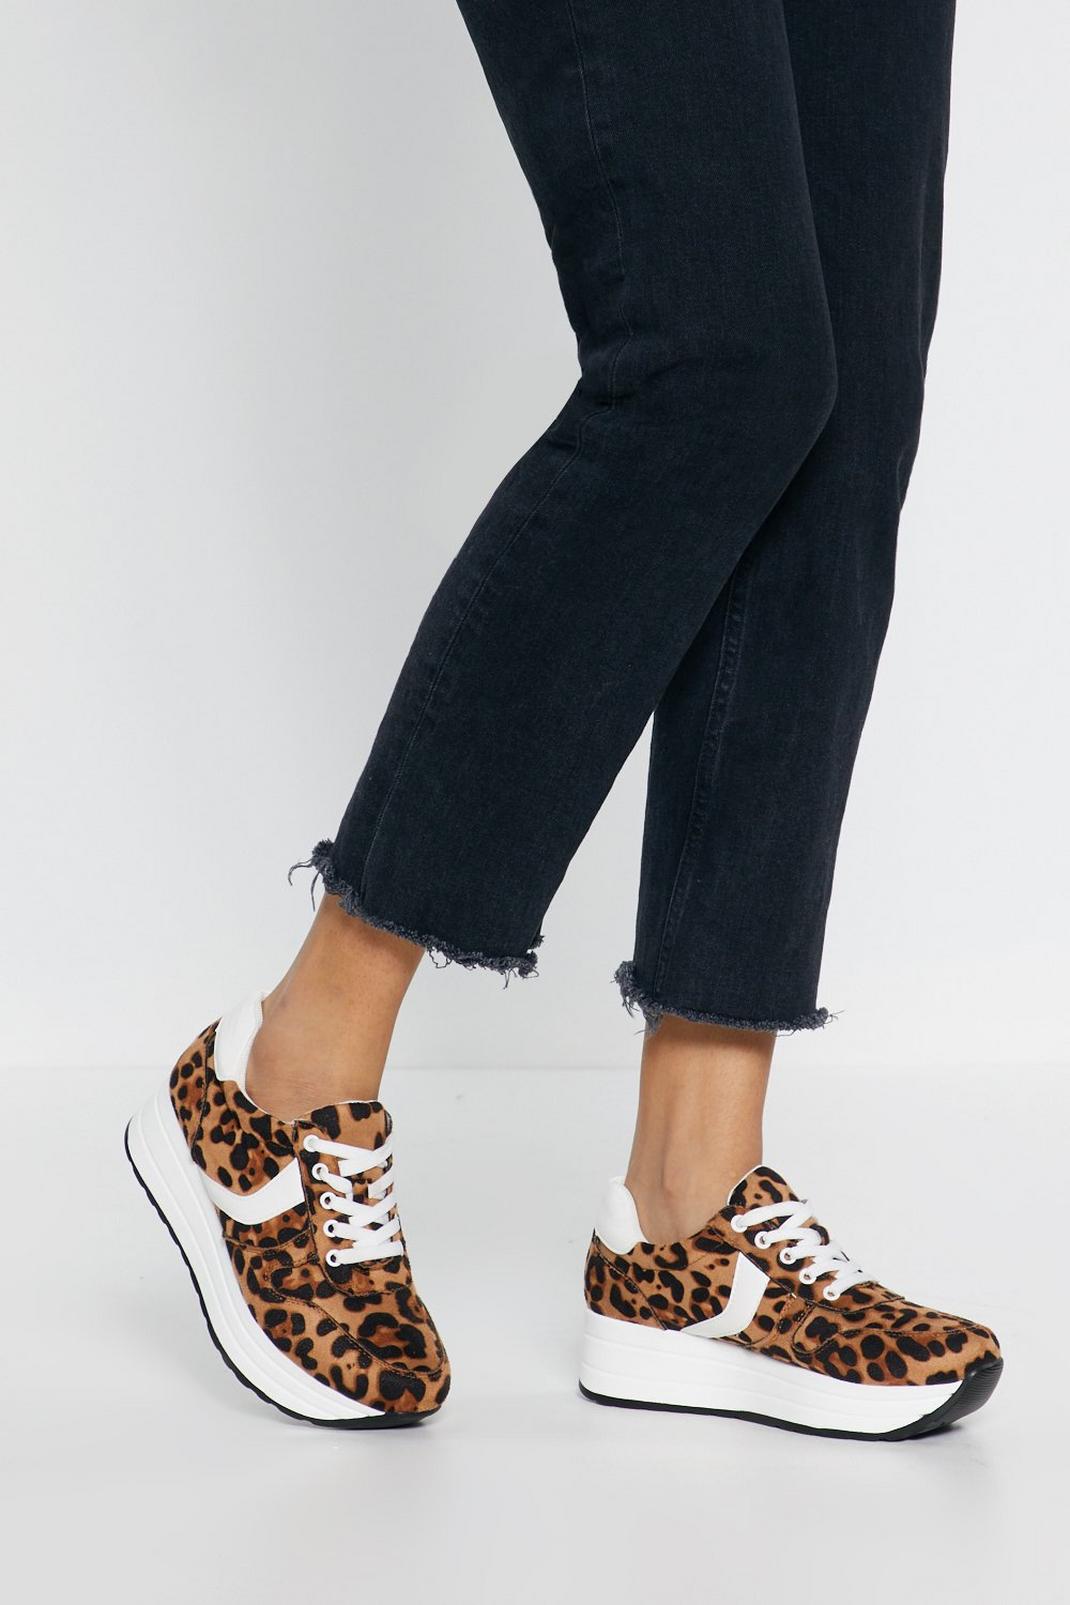 Catastrophic See you tomorrow alcove Leopard Print Flatform Sneakers | Nasty Gal